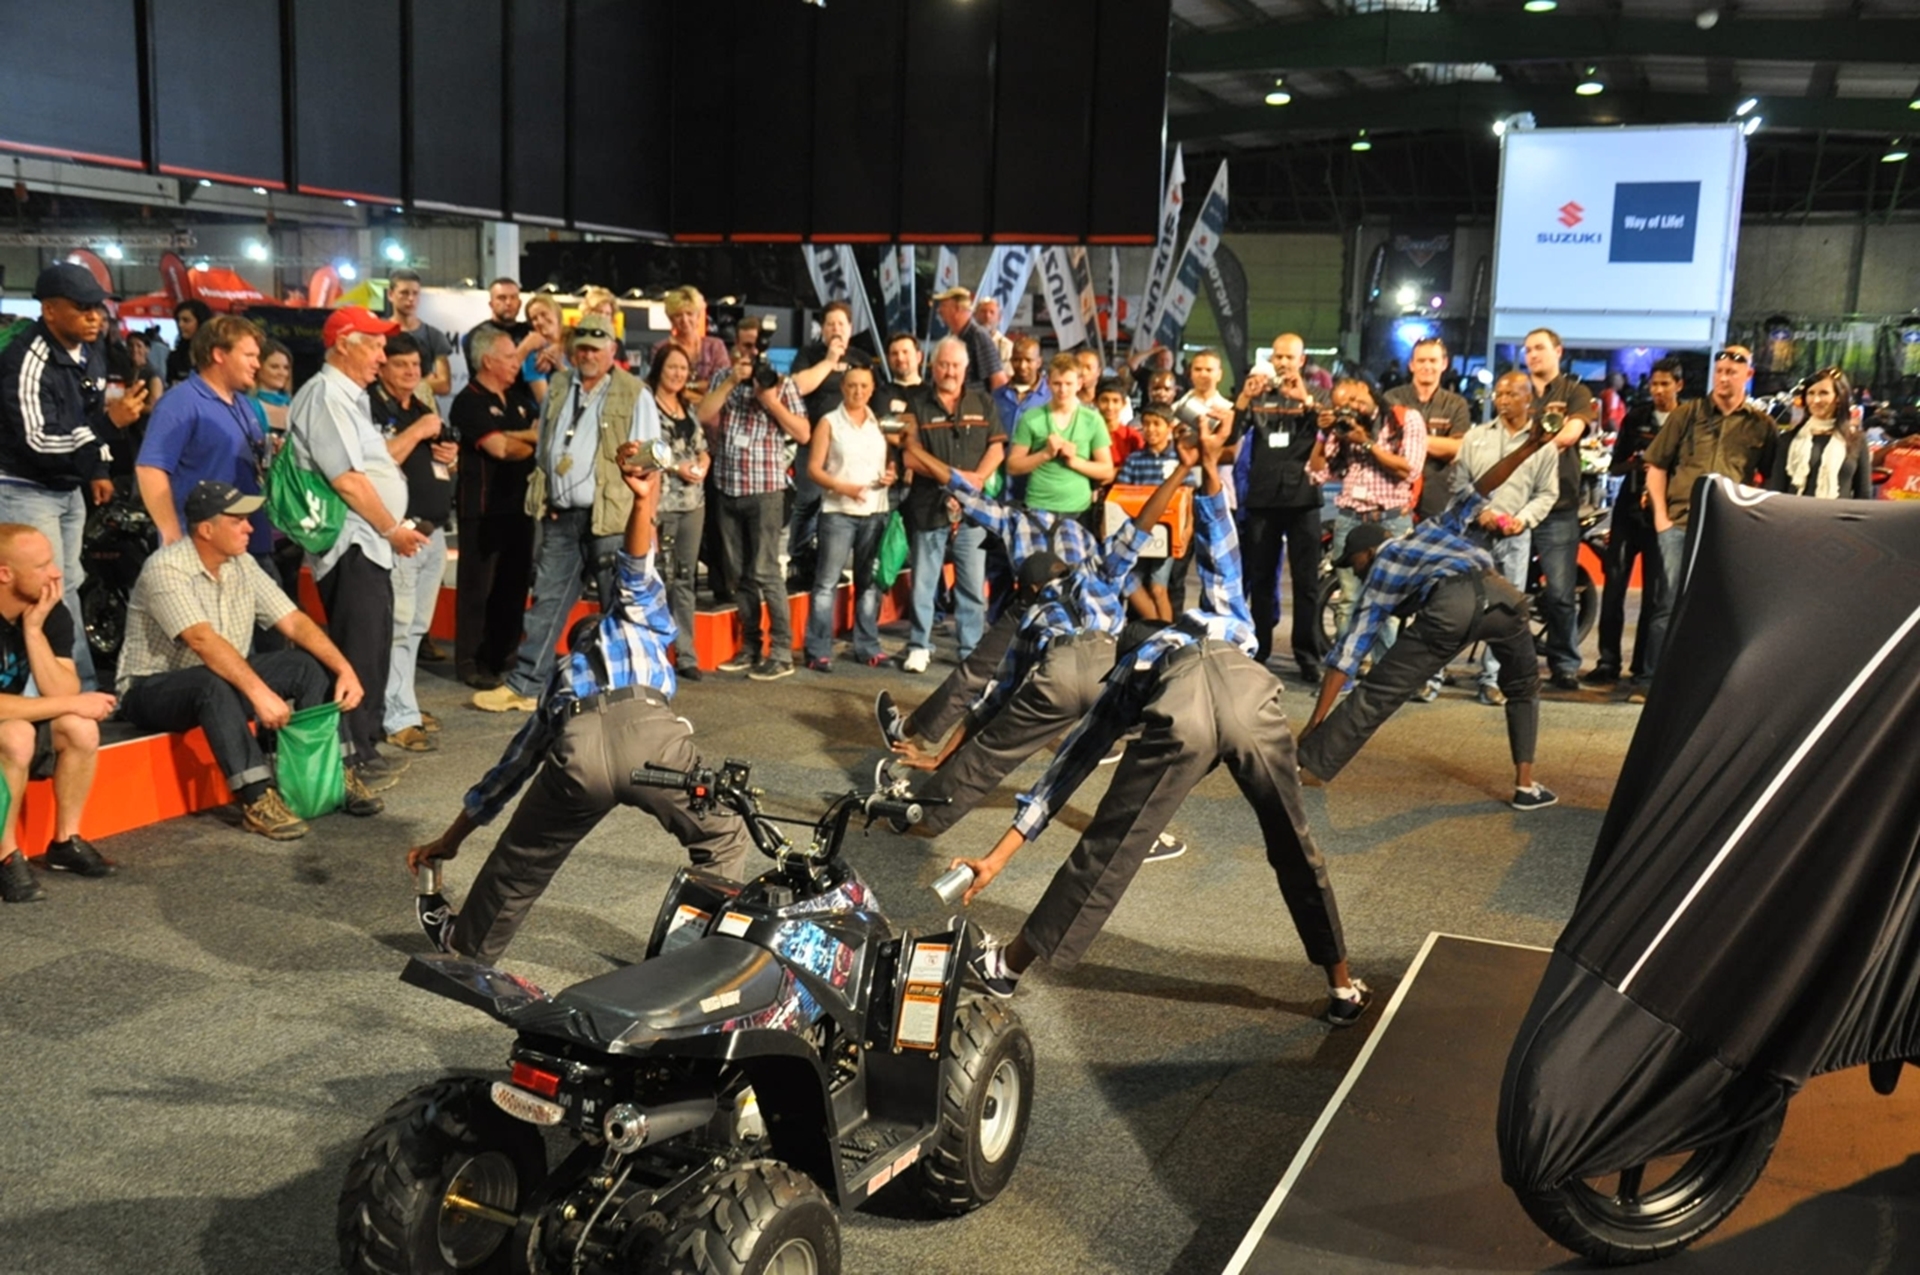 MOTORCYCLE SHOW AT EXPO CENTRE PROVES RESOUNDING SUCCESS